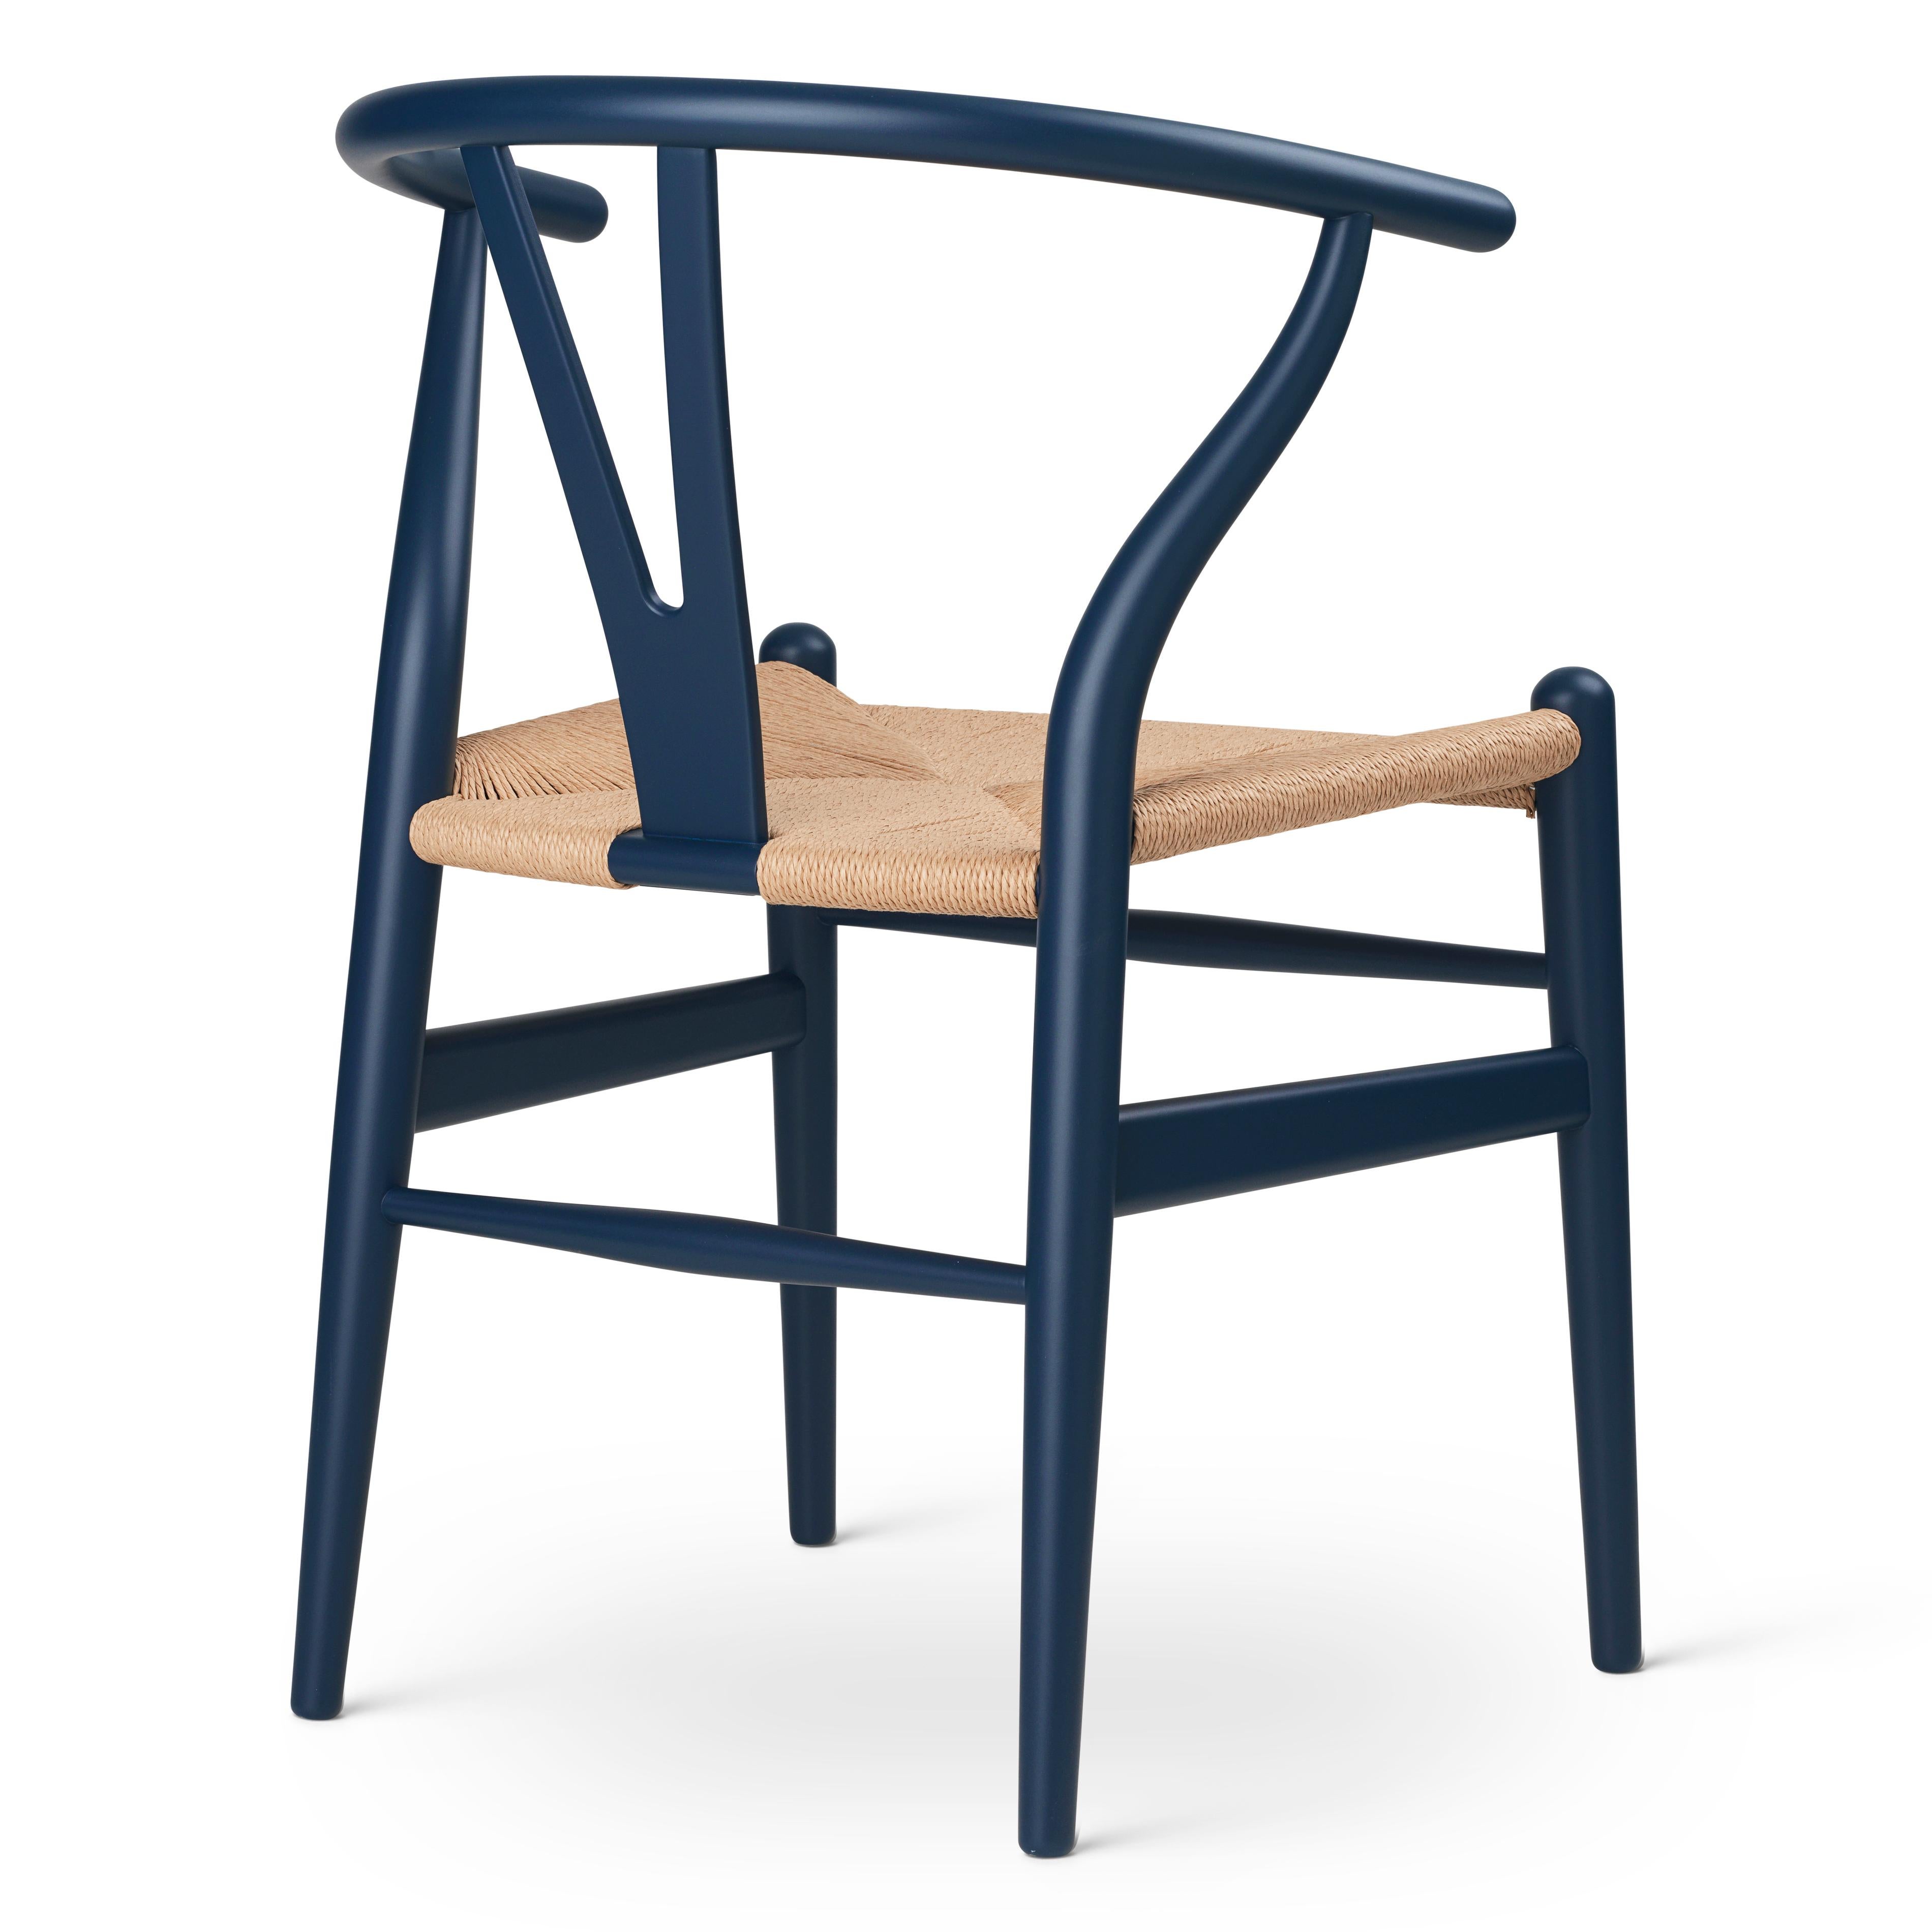 The very first model Hans J. Wegner designed exclusively for Carl Hansen & Søn in 1949, the CH24 or wishbone chair, has been in continuous production since its introduction in 1950.

With a form that is uniquely its own, the iconic CH24 wishbone